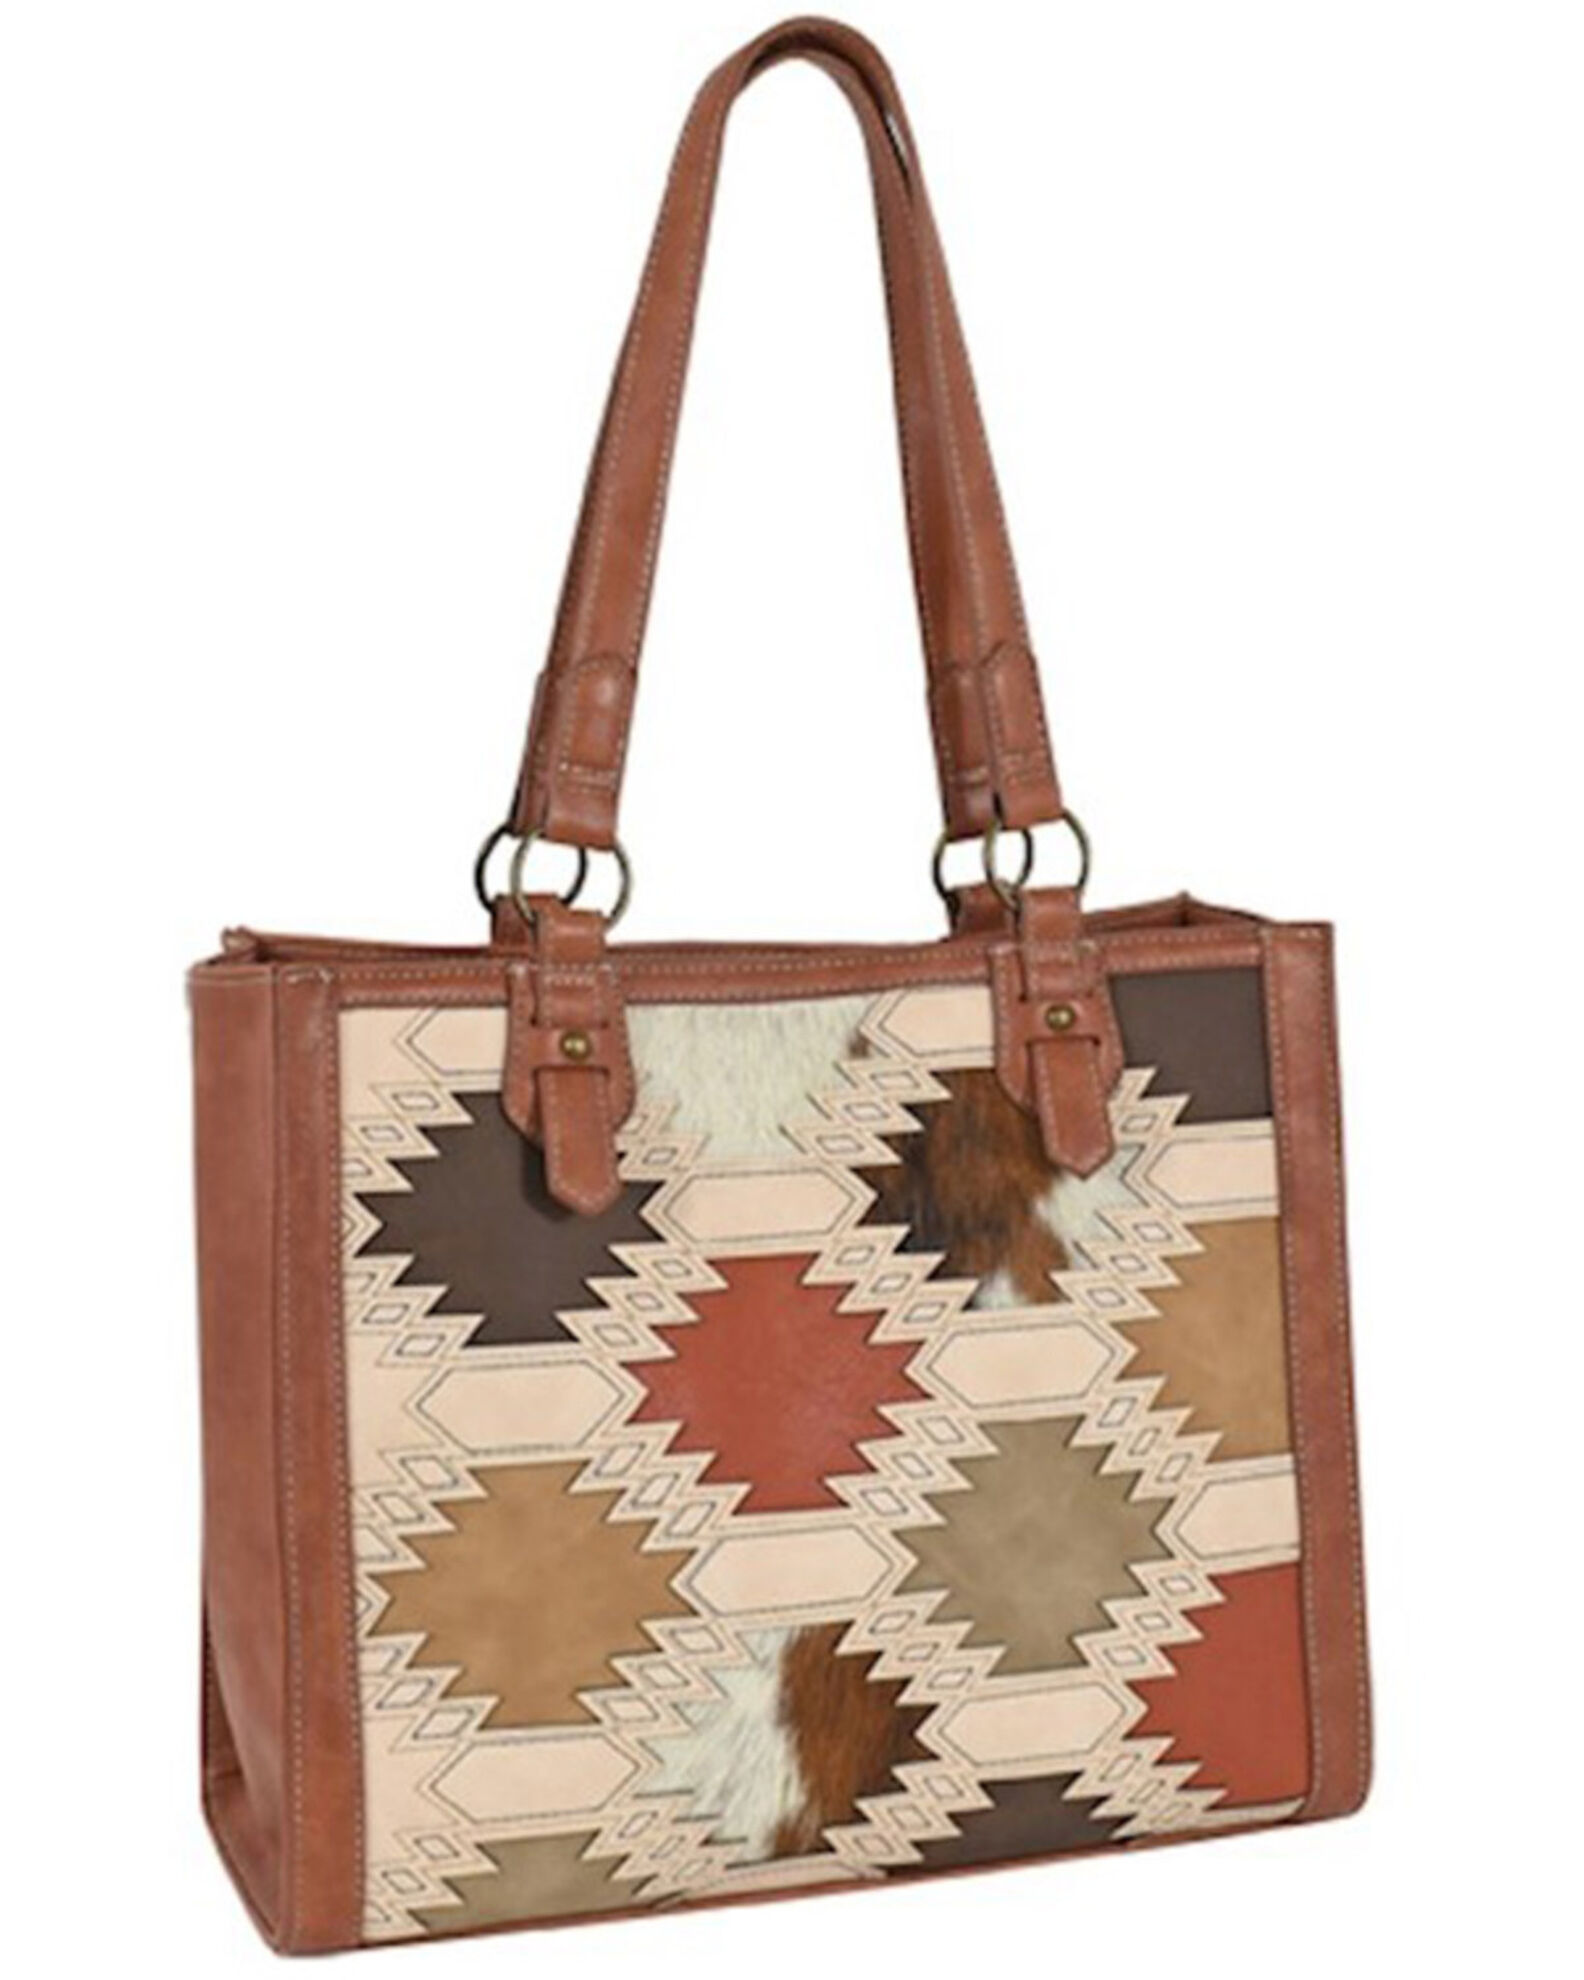 Catchfly Women's Southwestern Color Block Brindle Inlay Tote